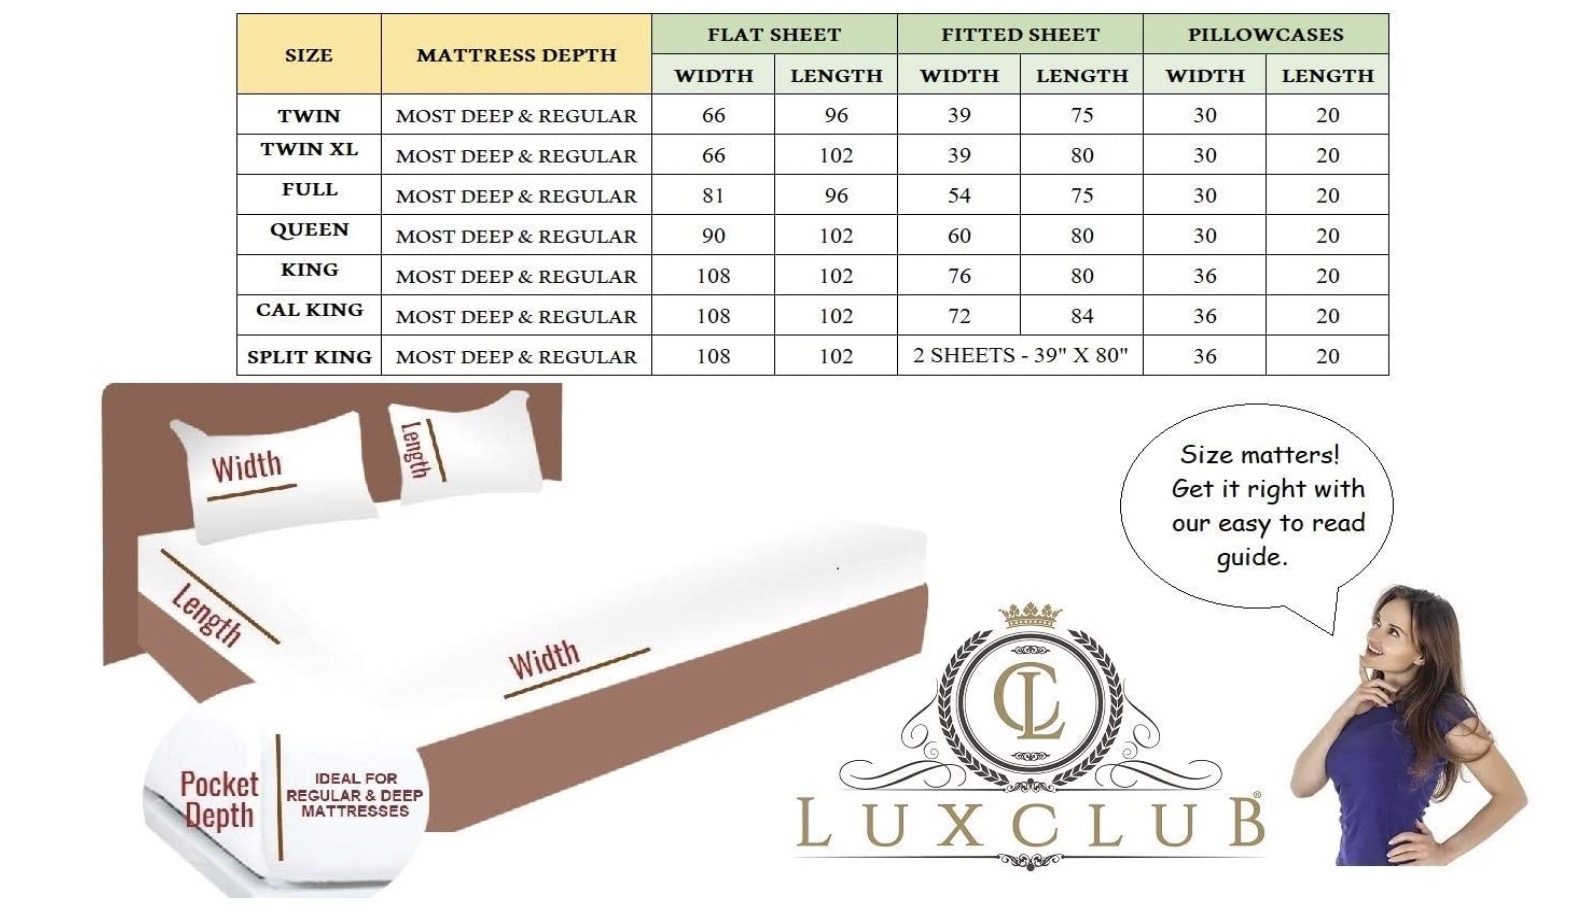 LuxClub Bamboo Sheets Review